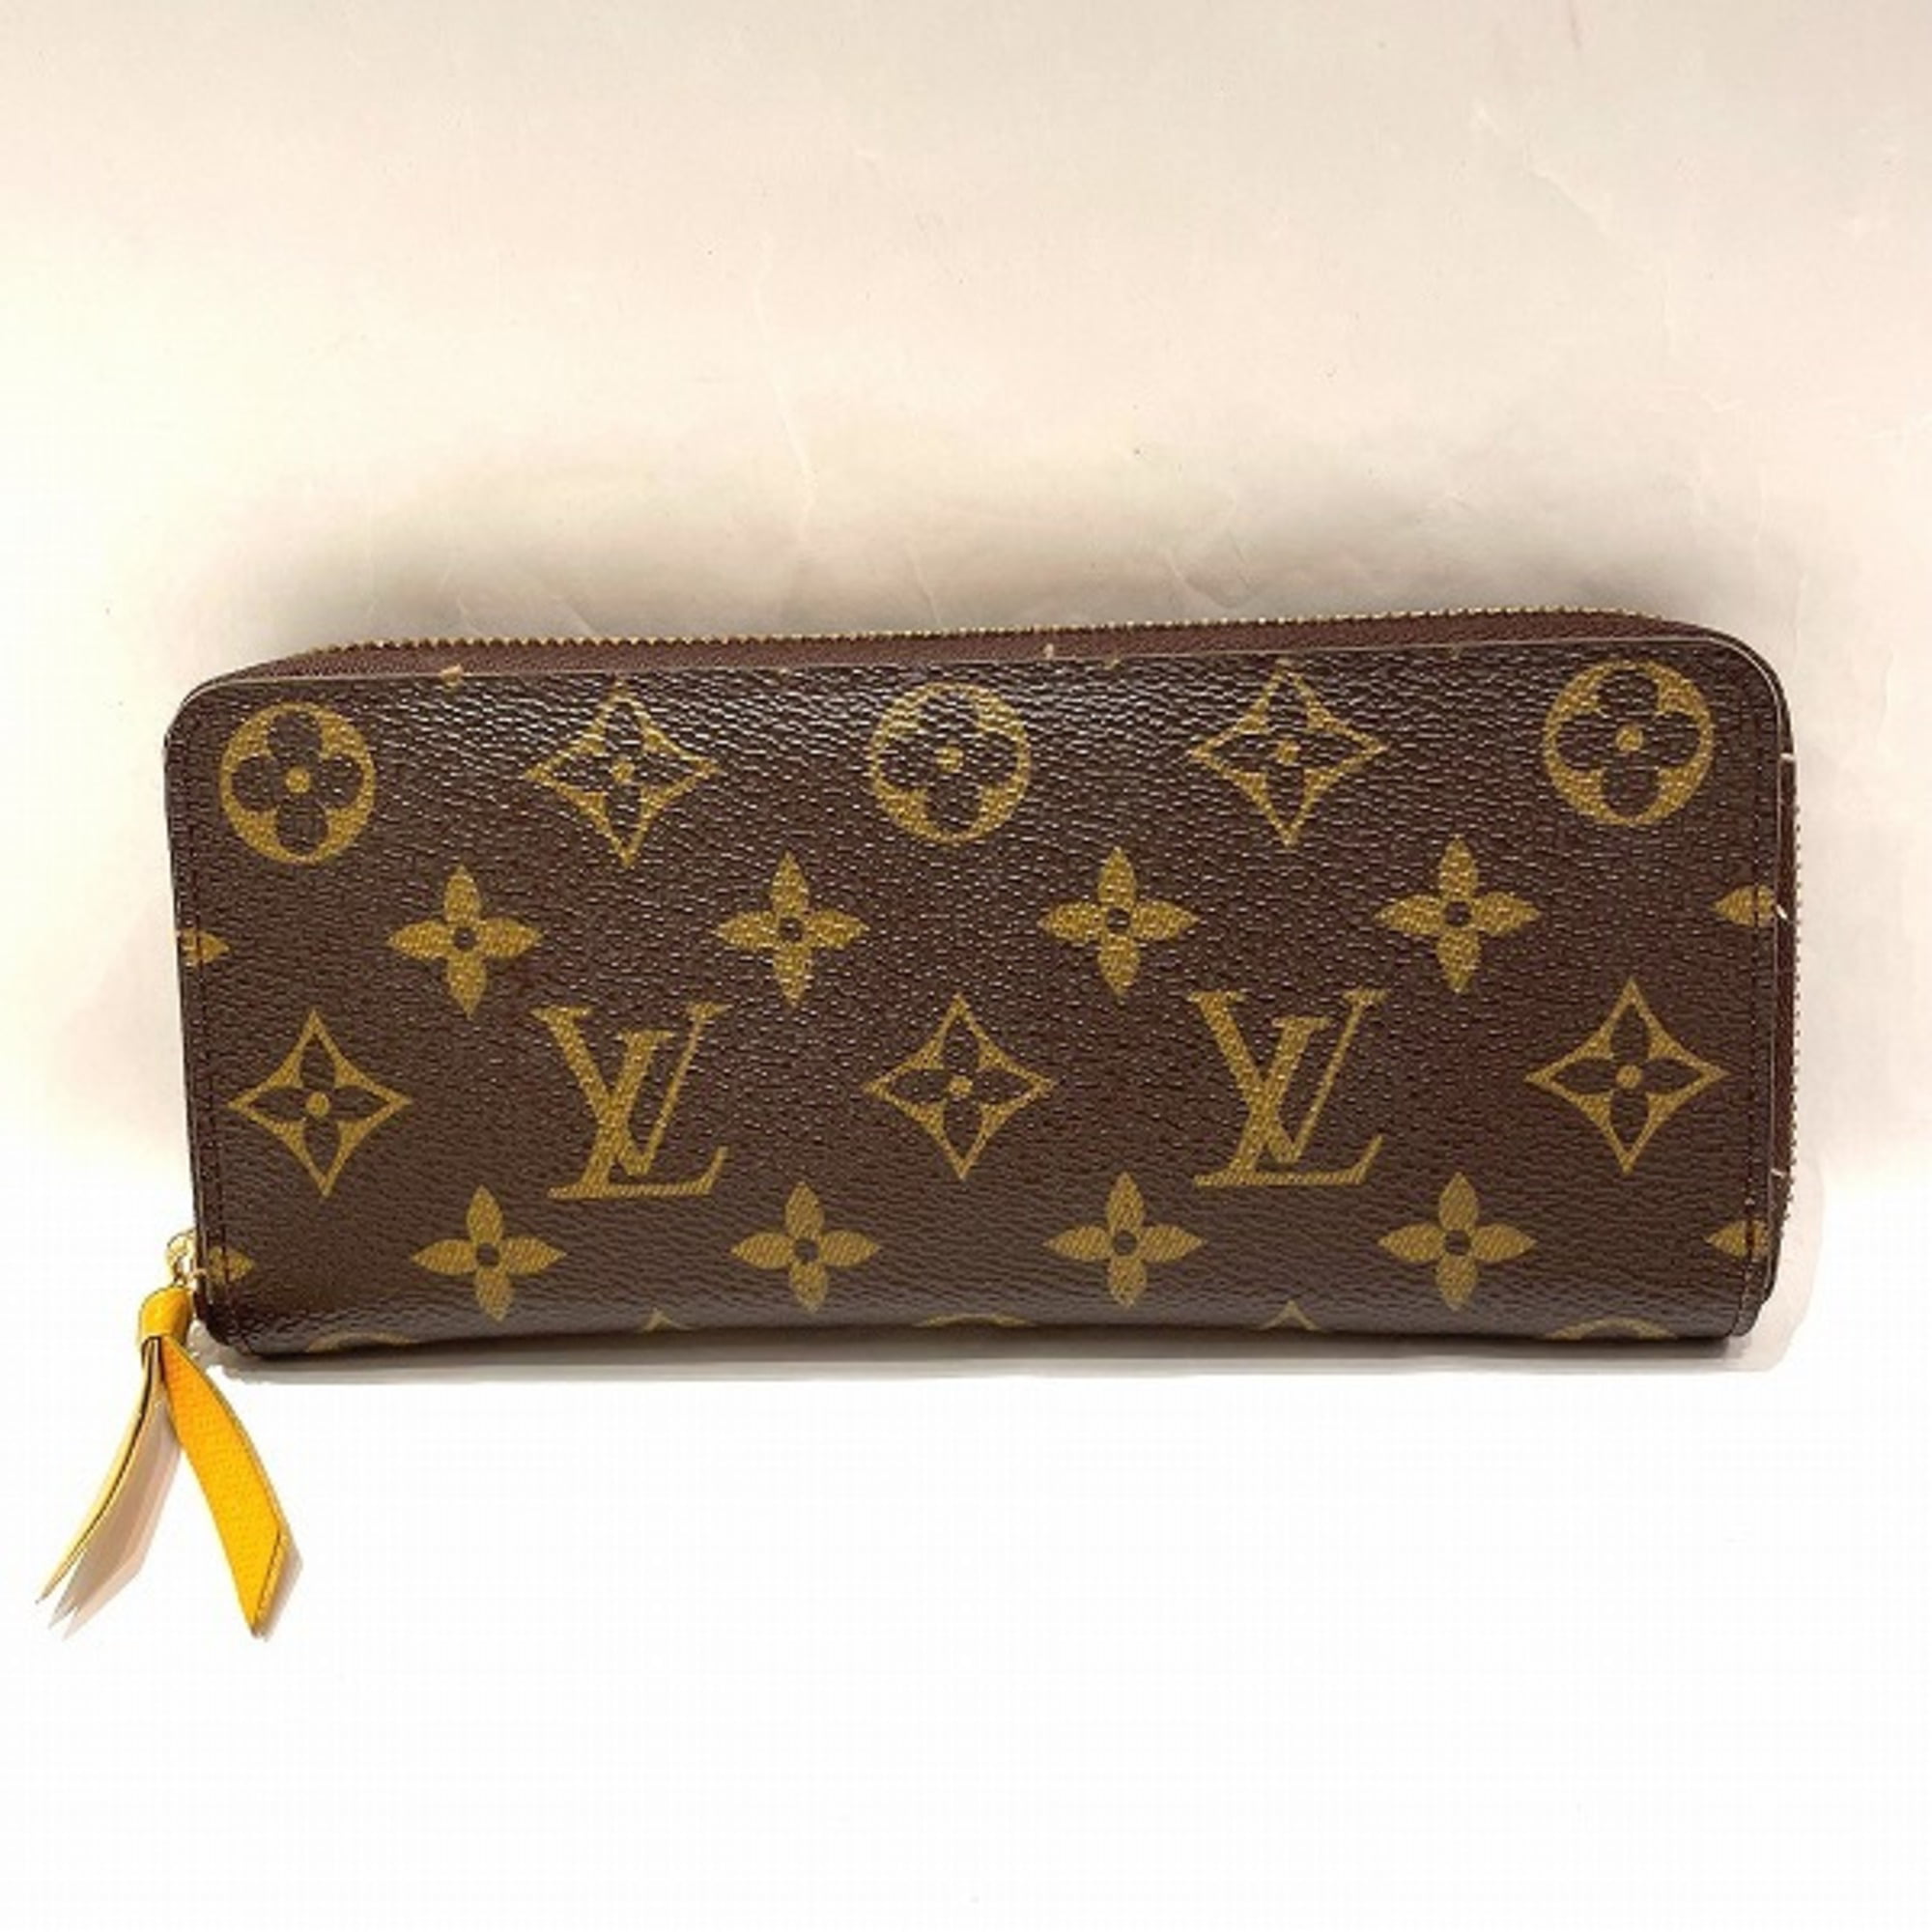 Authenticated Used Louis Vuitton Monogram Portefeuille Clemence